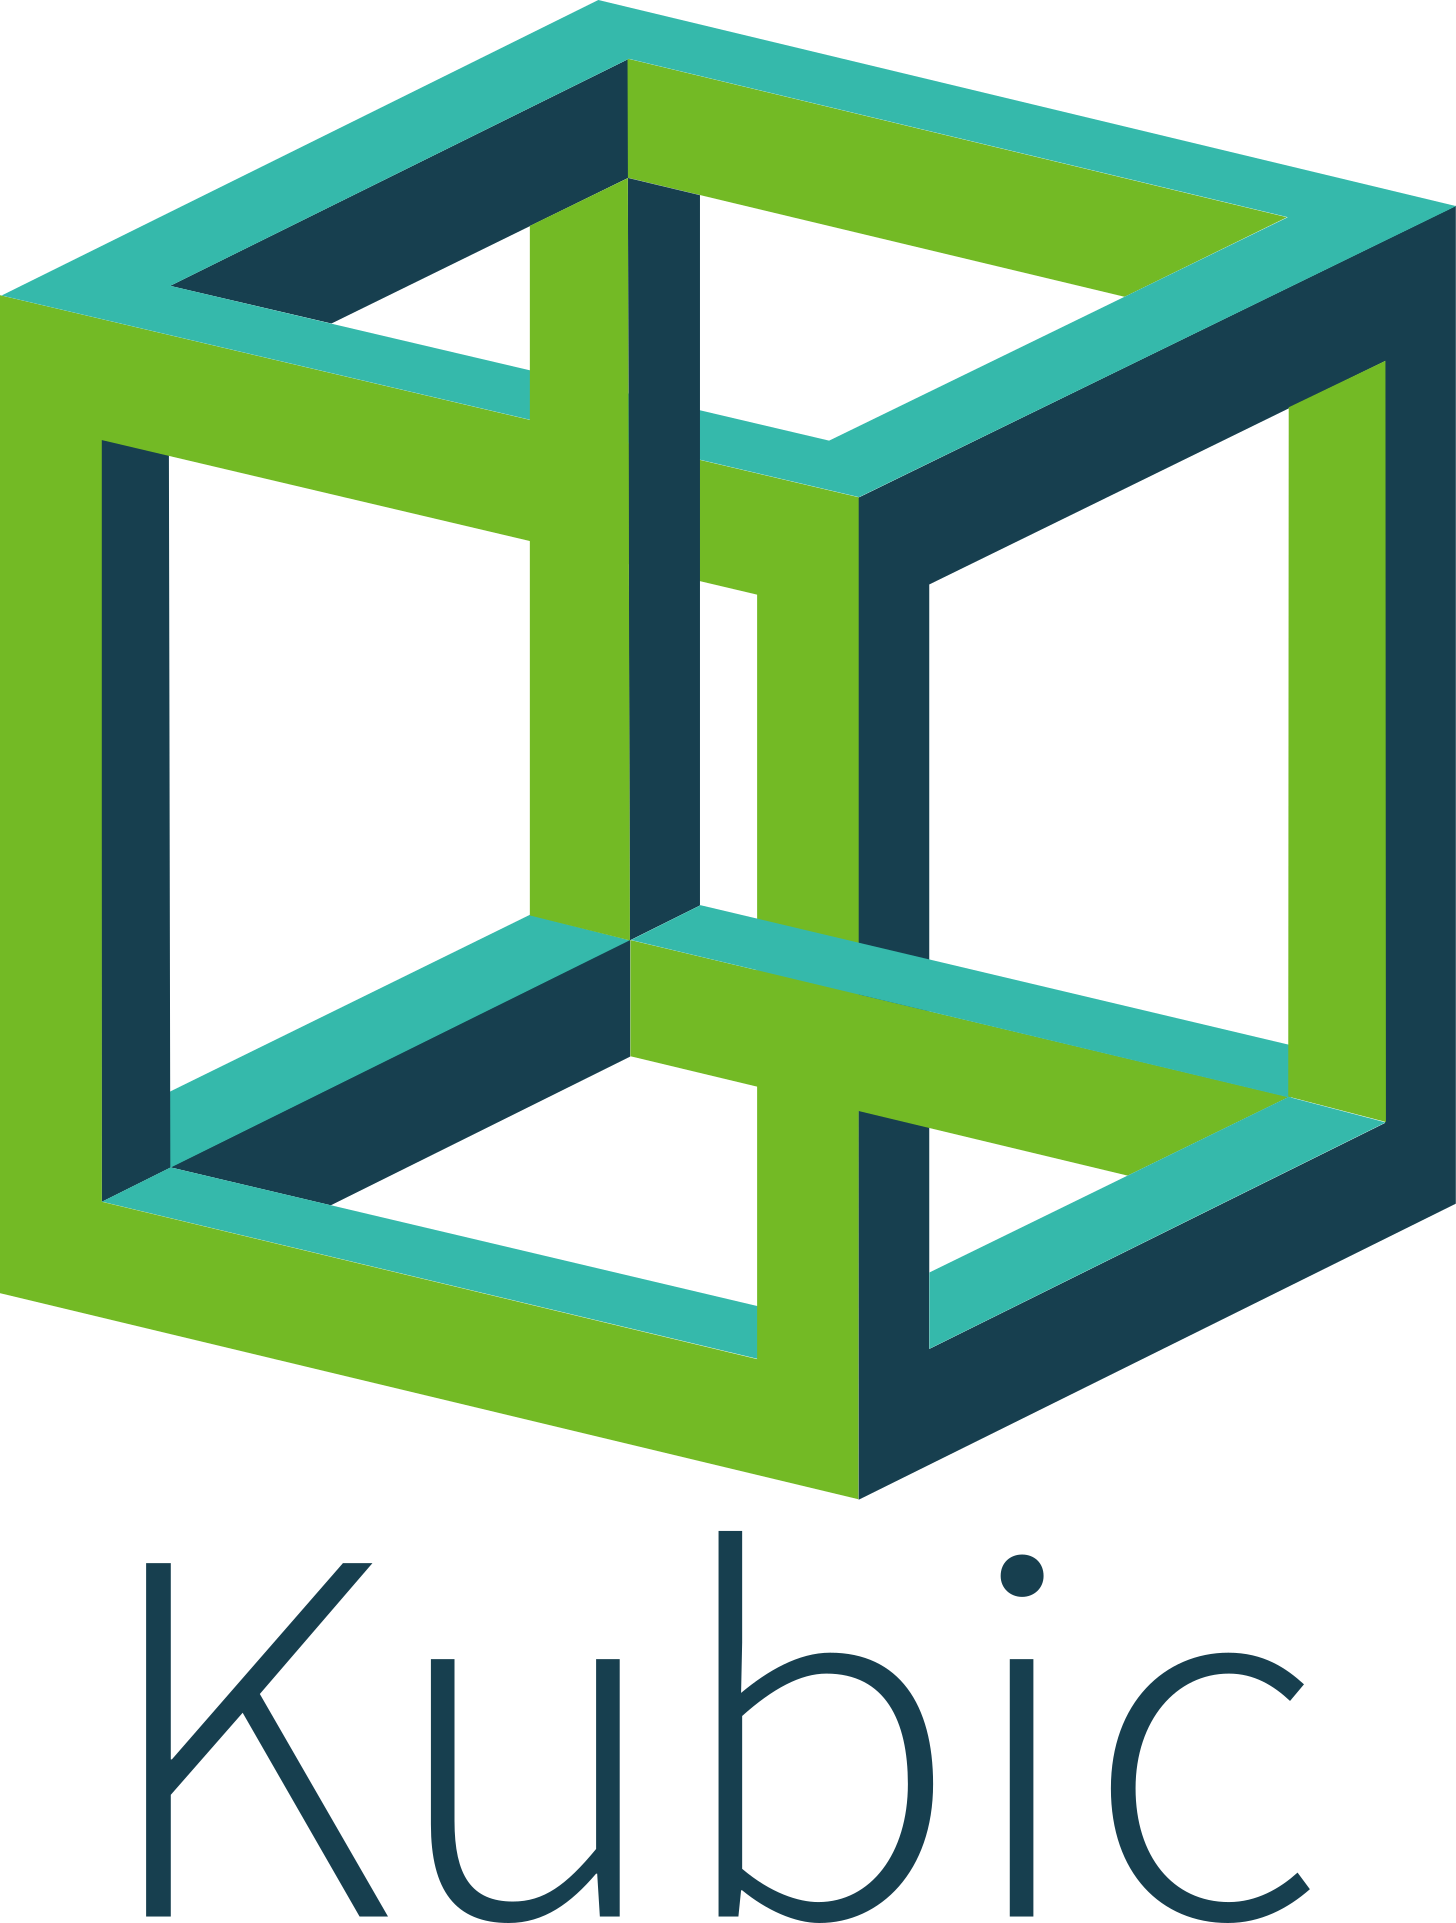 Kubic logo official.png